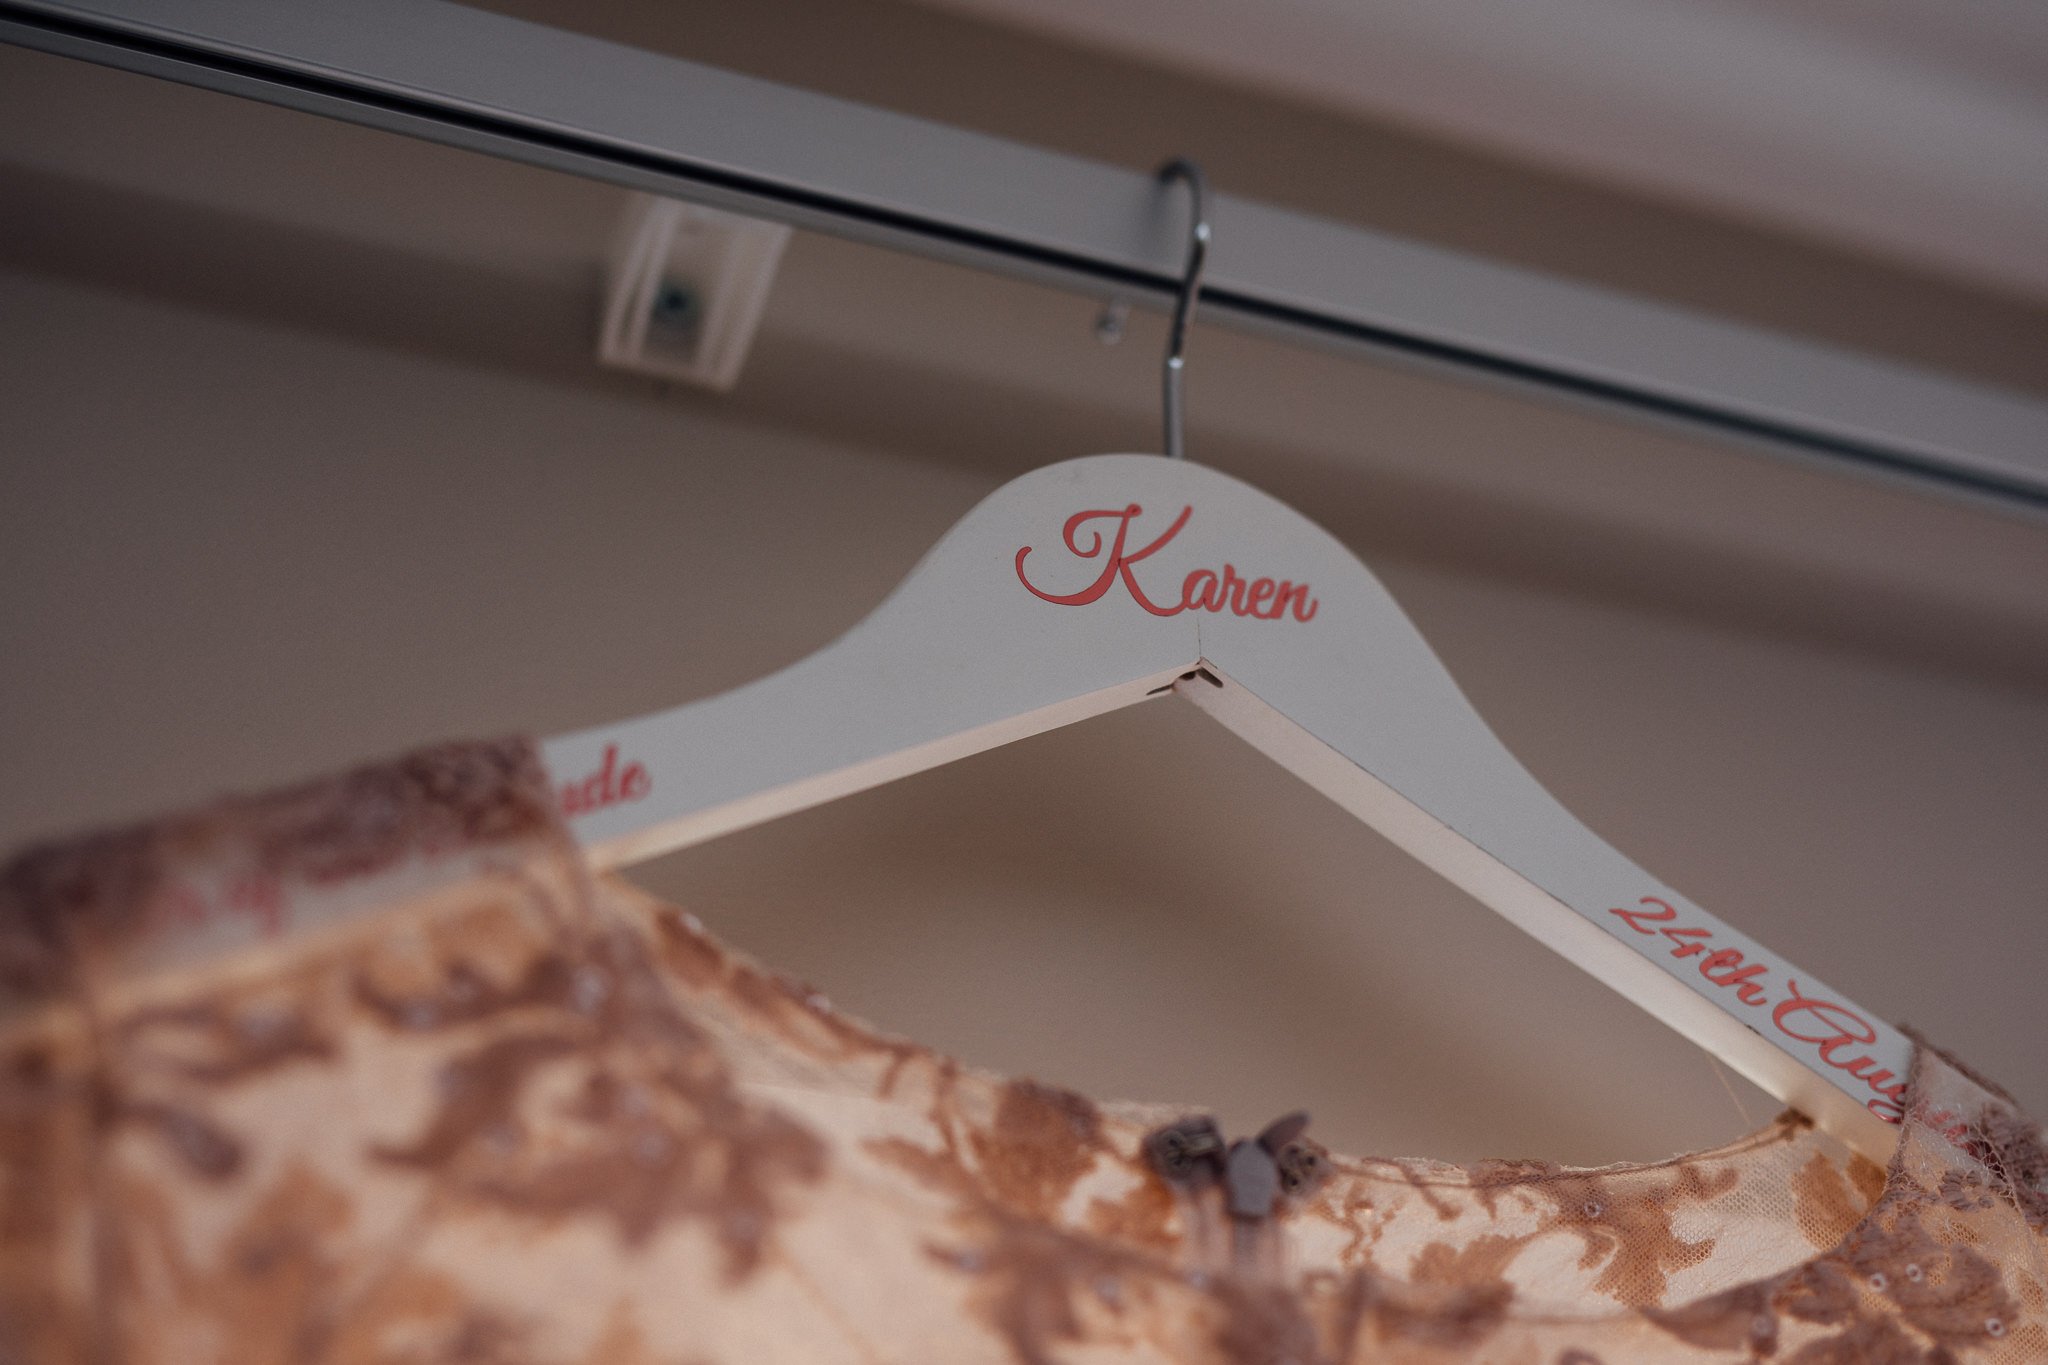  Clothes hanger showing the name of the wearer of the dress 